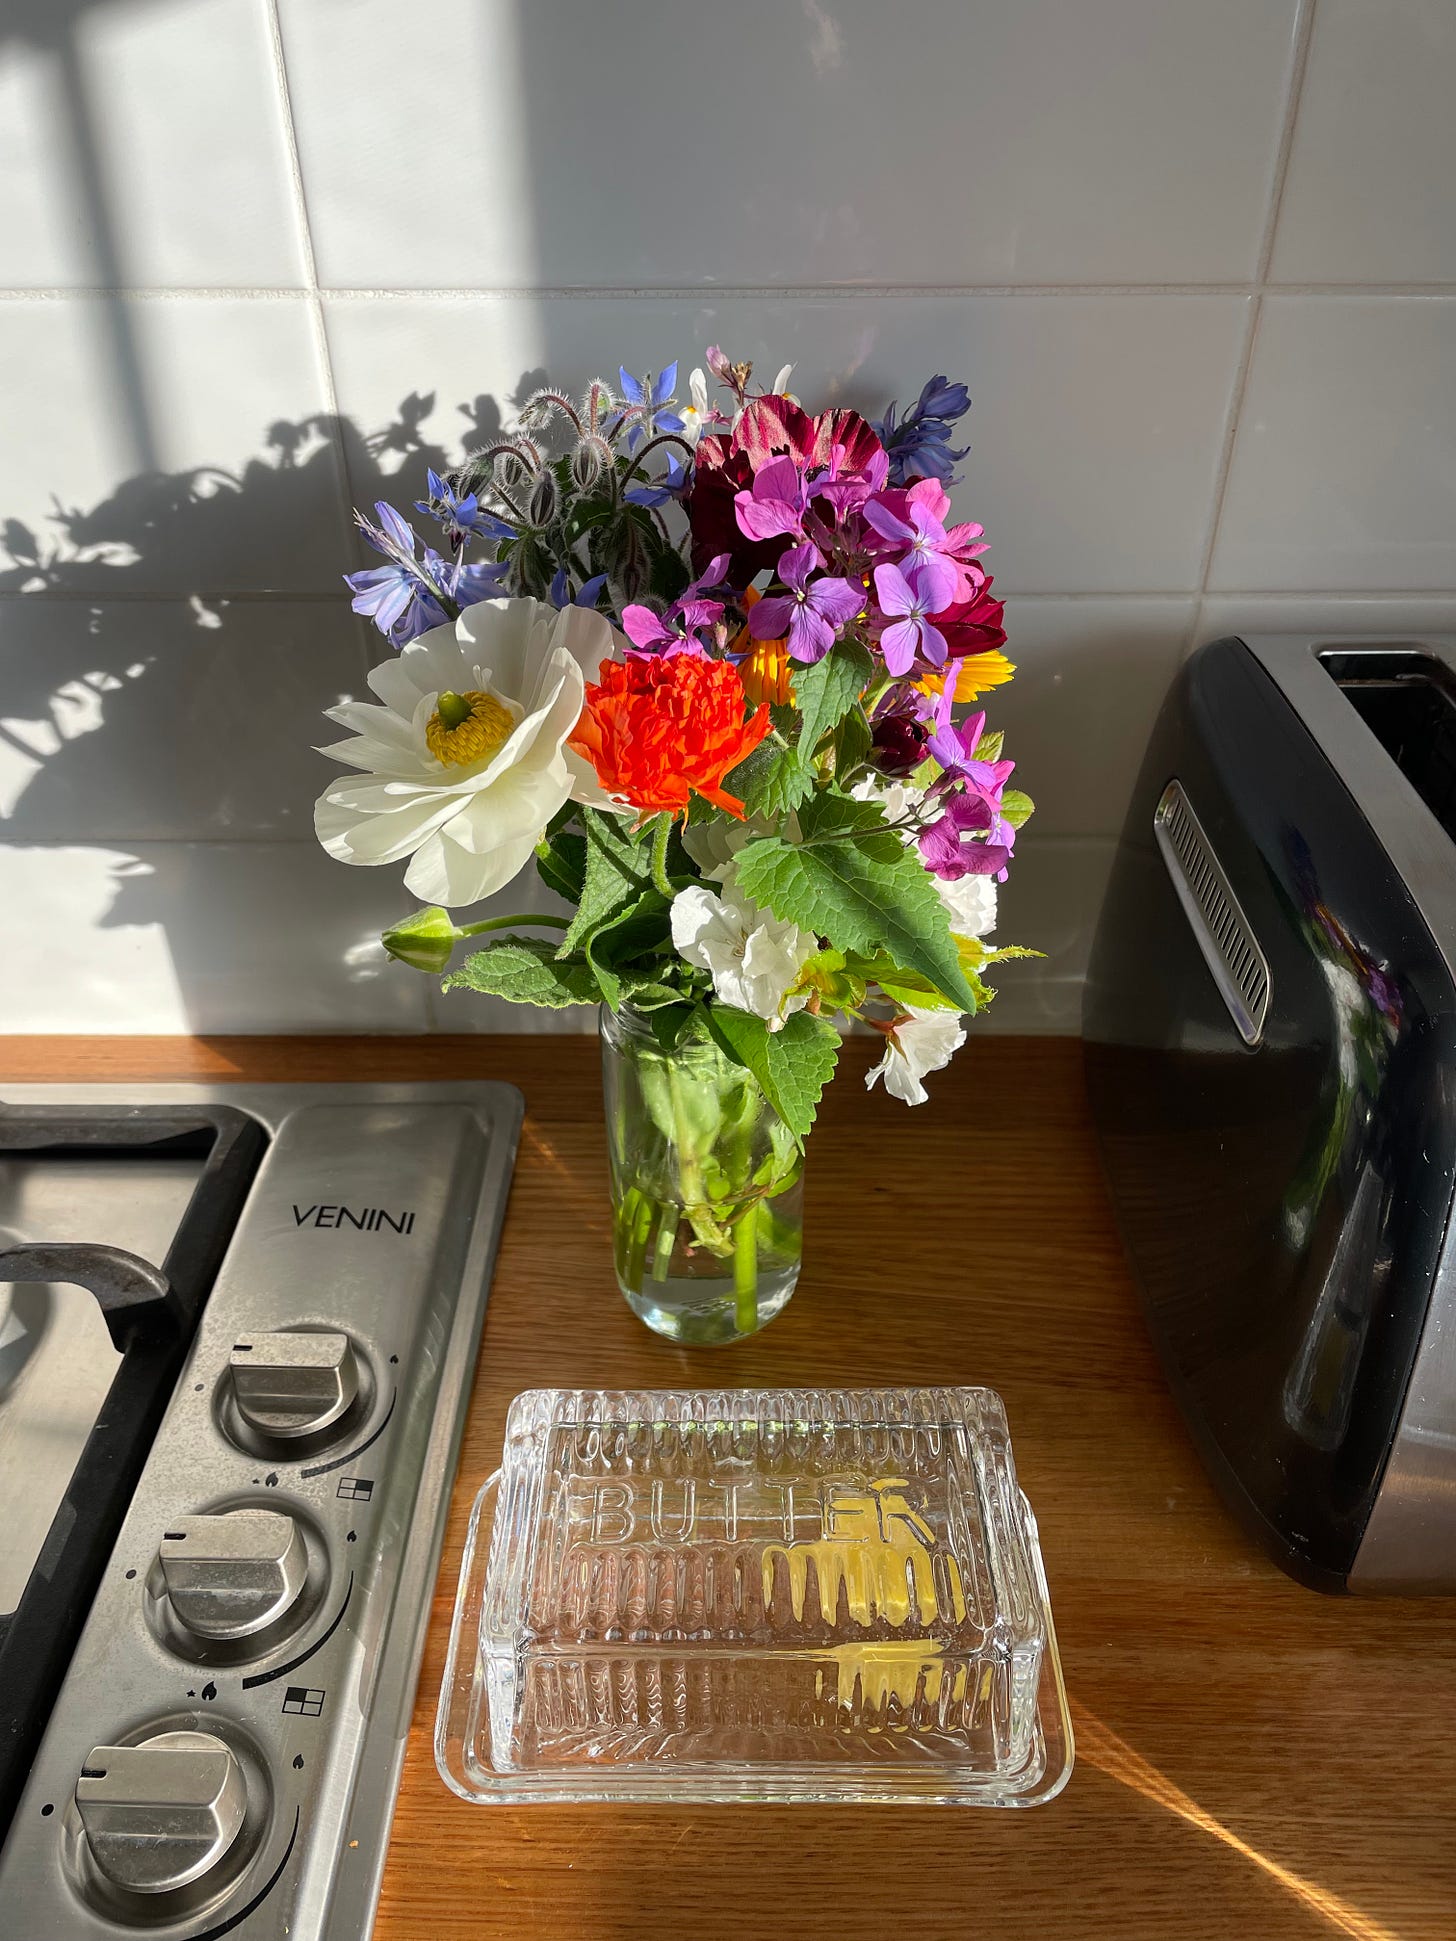 Colourful bouquet of flowers in a jar sitting on the kitchen counter next to a toaster and the stove.